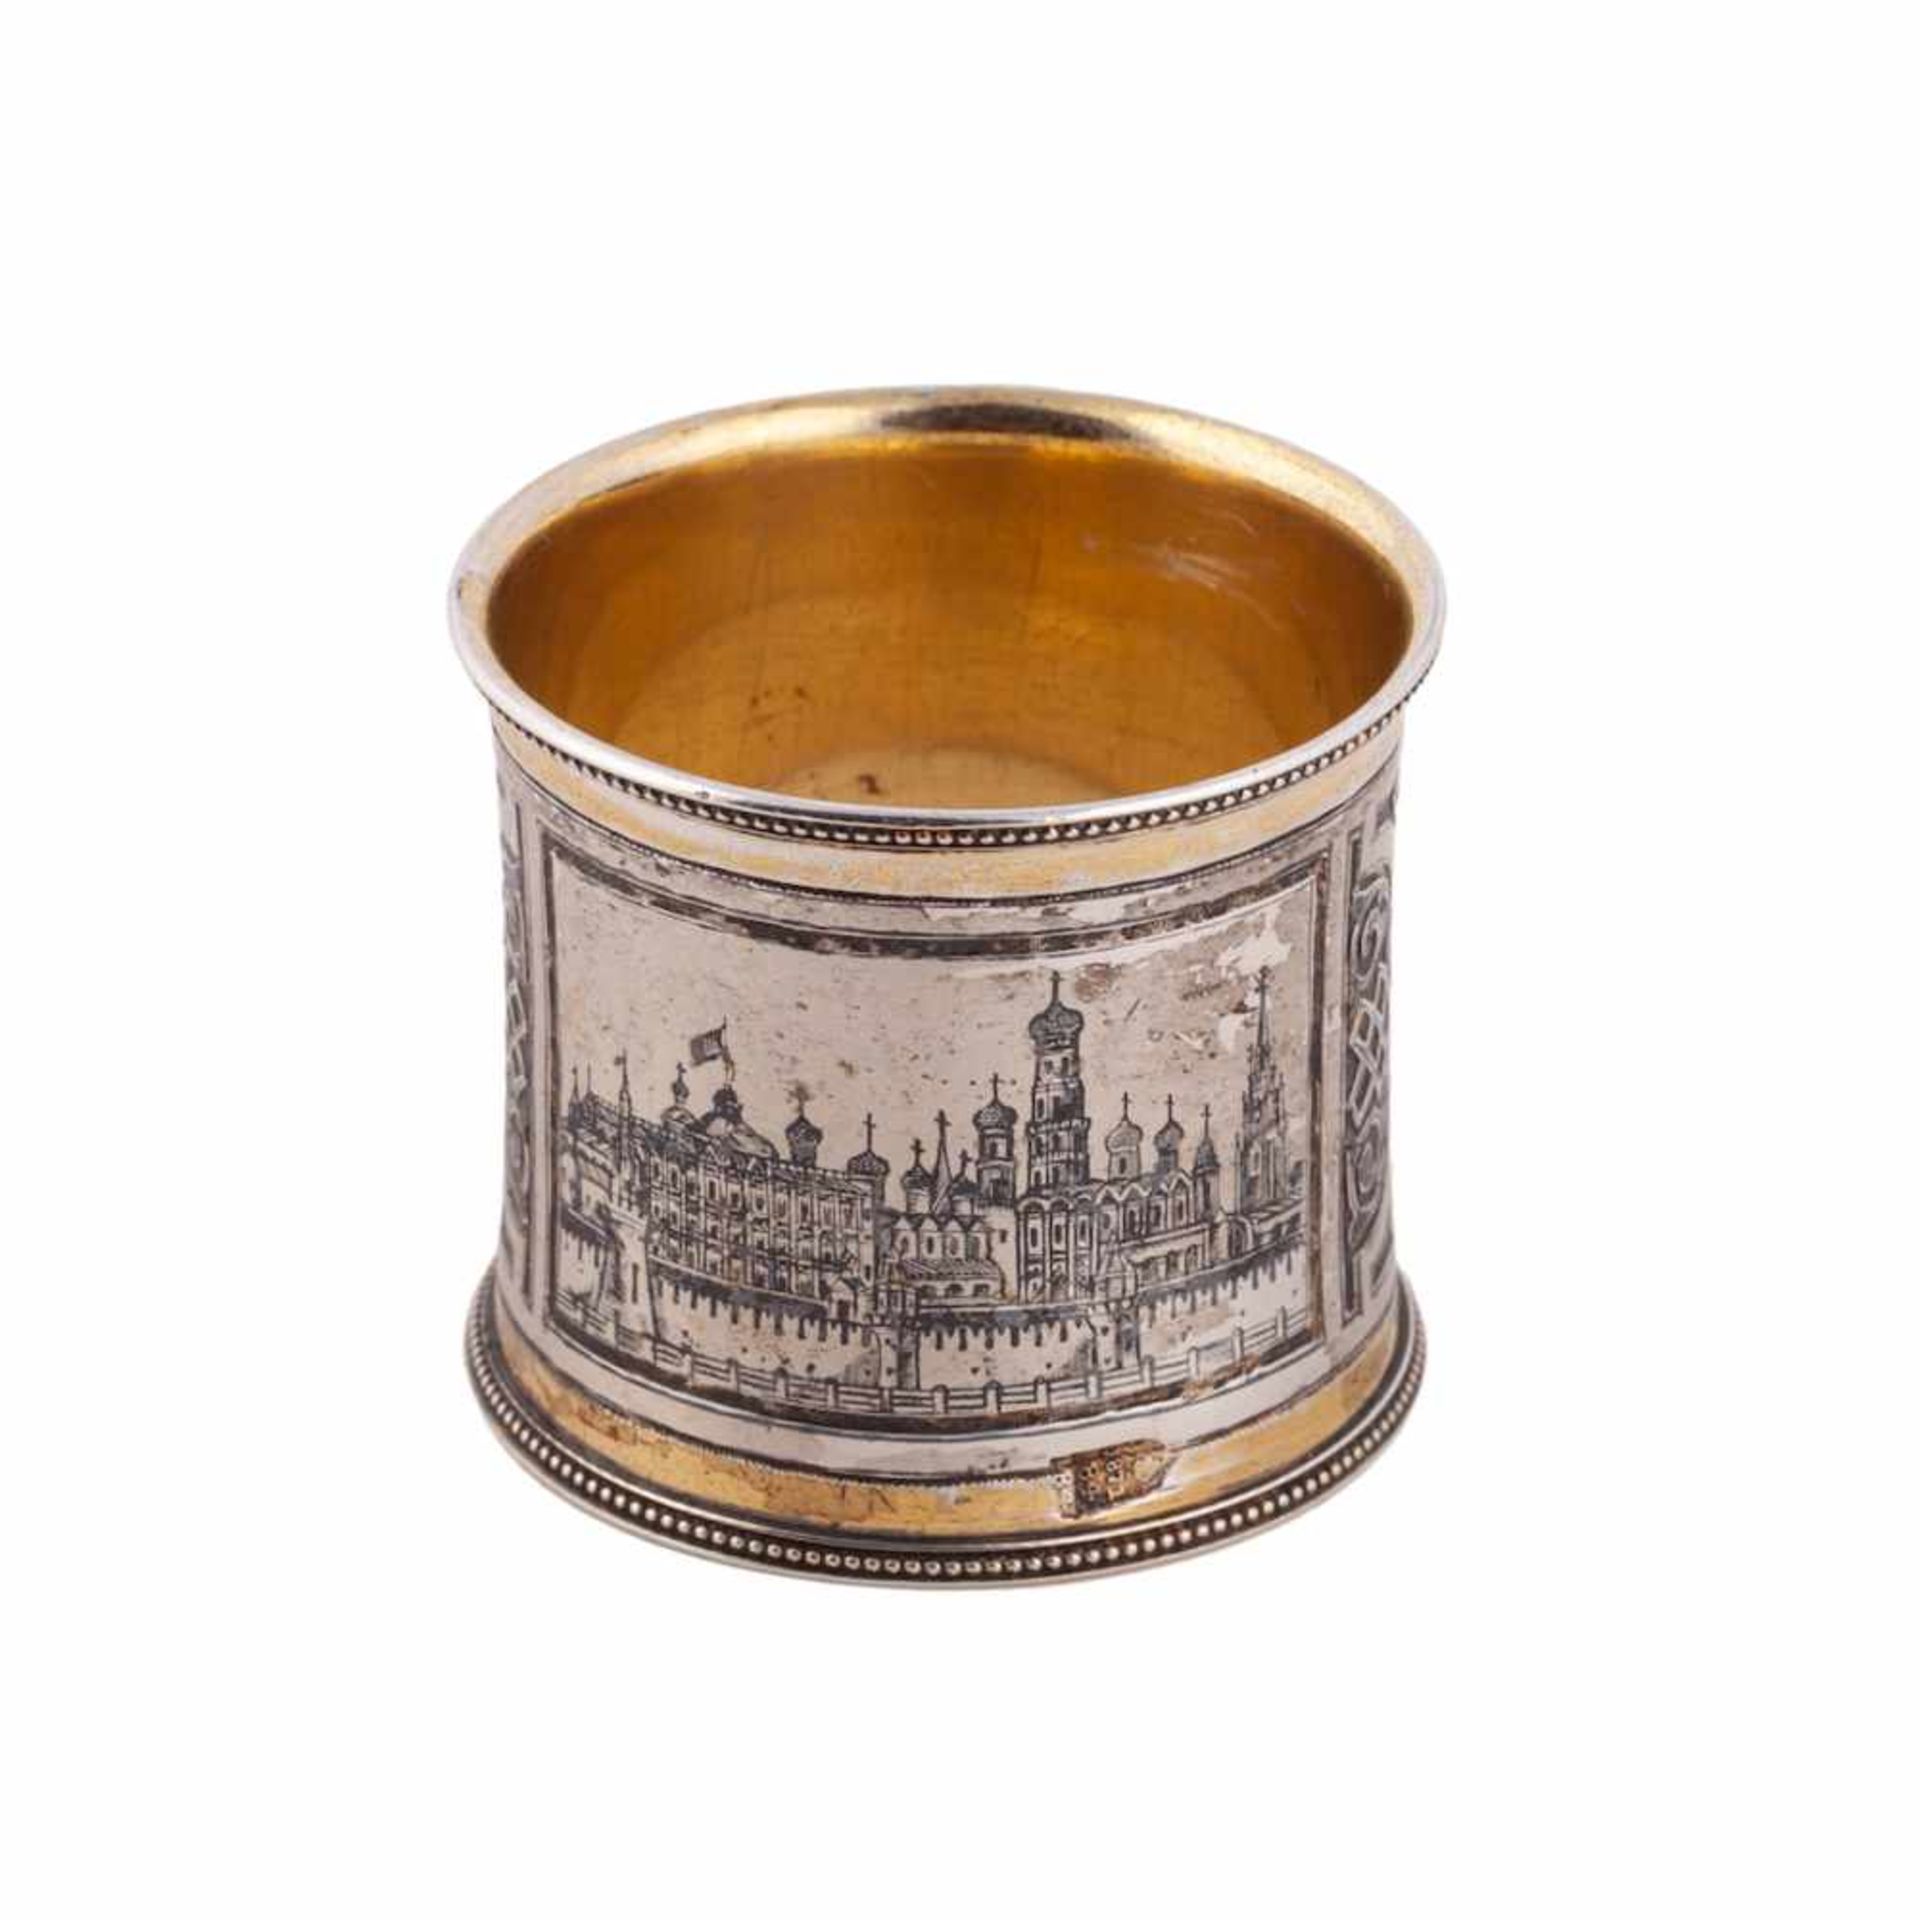 Russian napkin ring with the Moscow Kremlin view